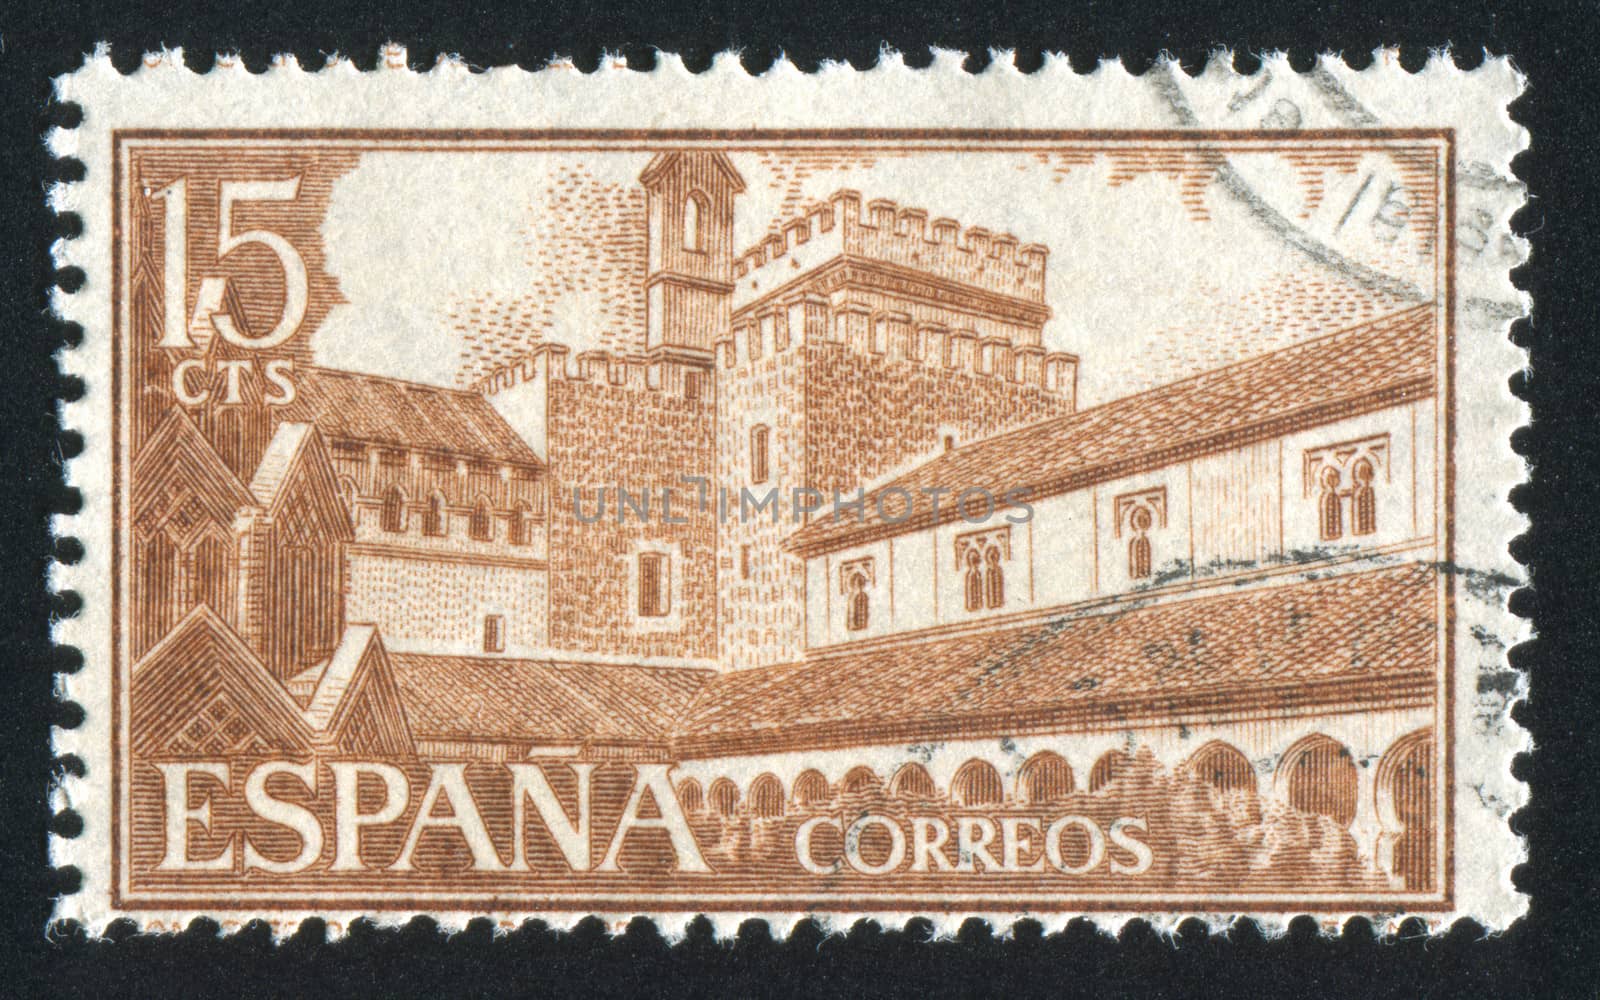 SPAIN - CIRCA 1959: stamp printed by Spain, shows Monastery of Guadalupe, circa 1959